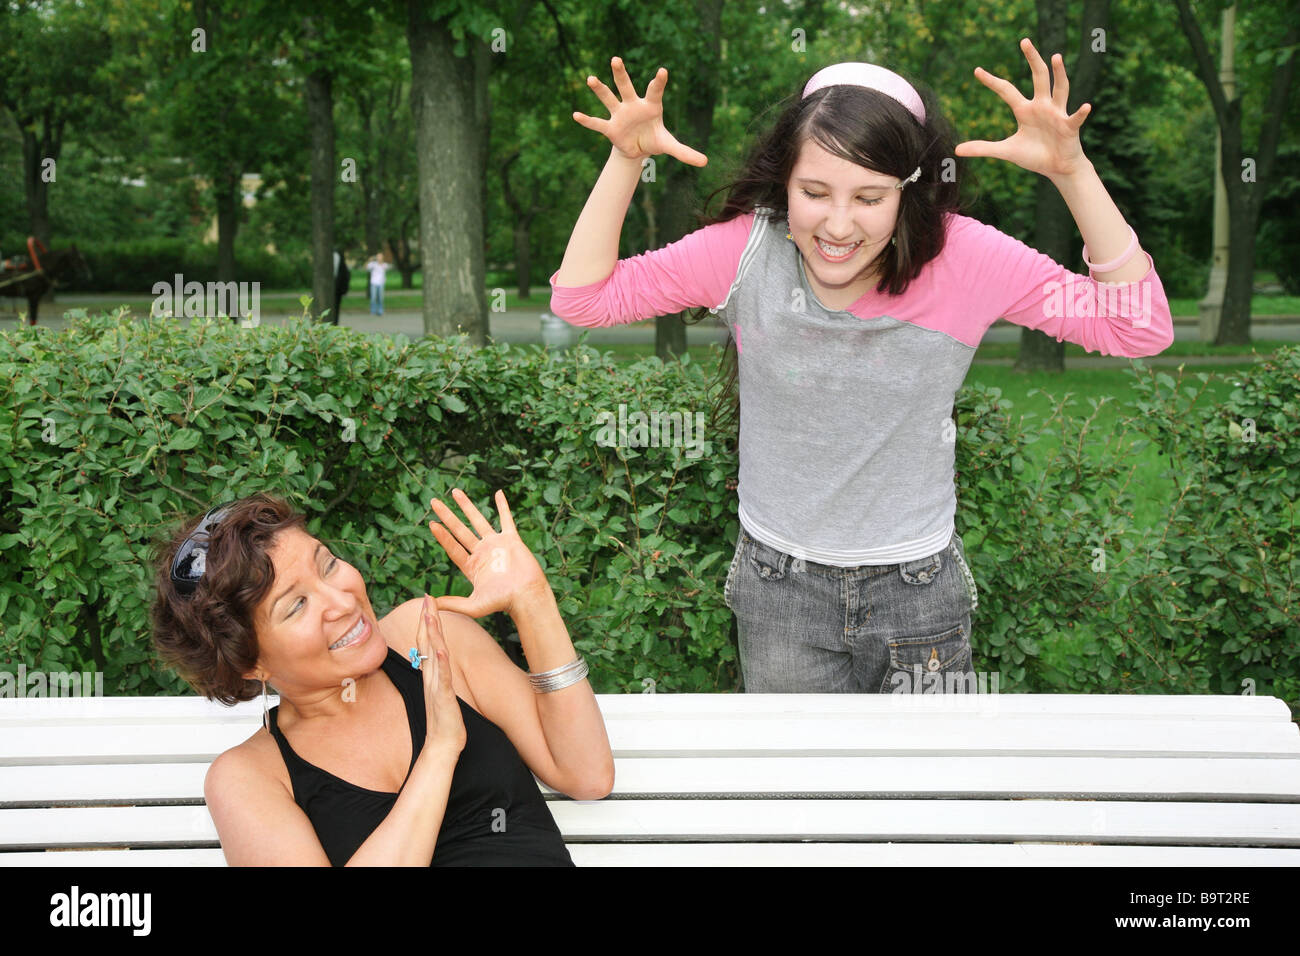 mother sits on the bench, daughter stands near Stock Photo